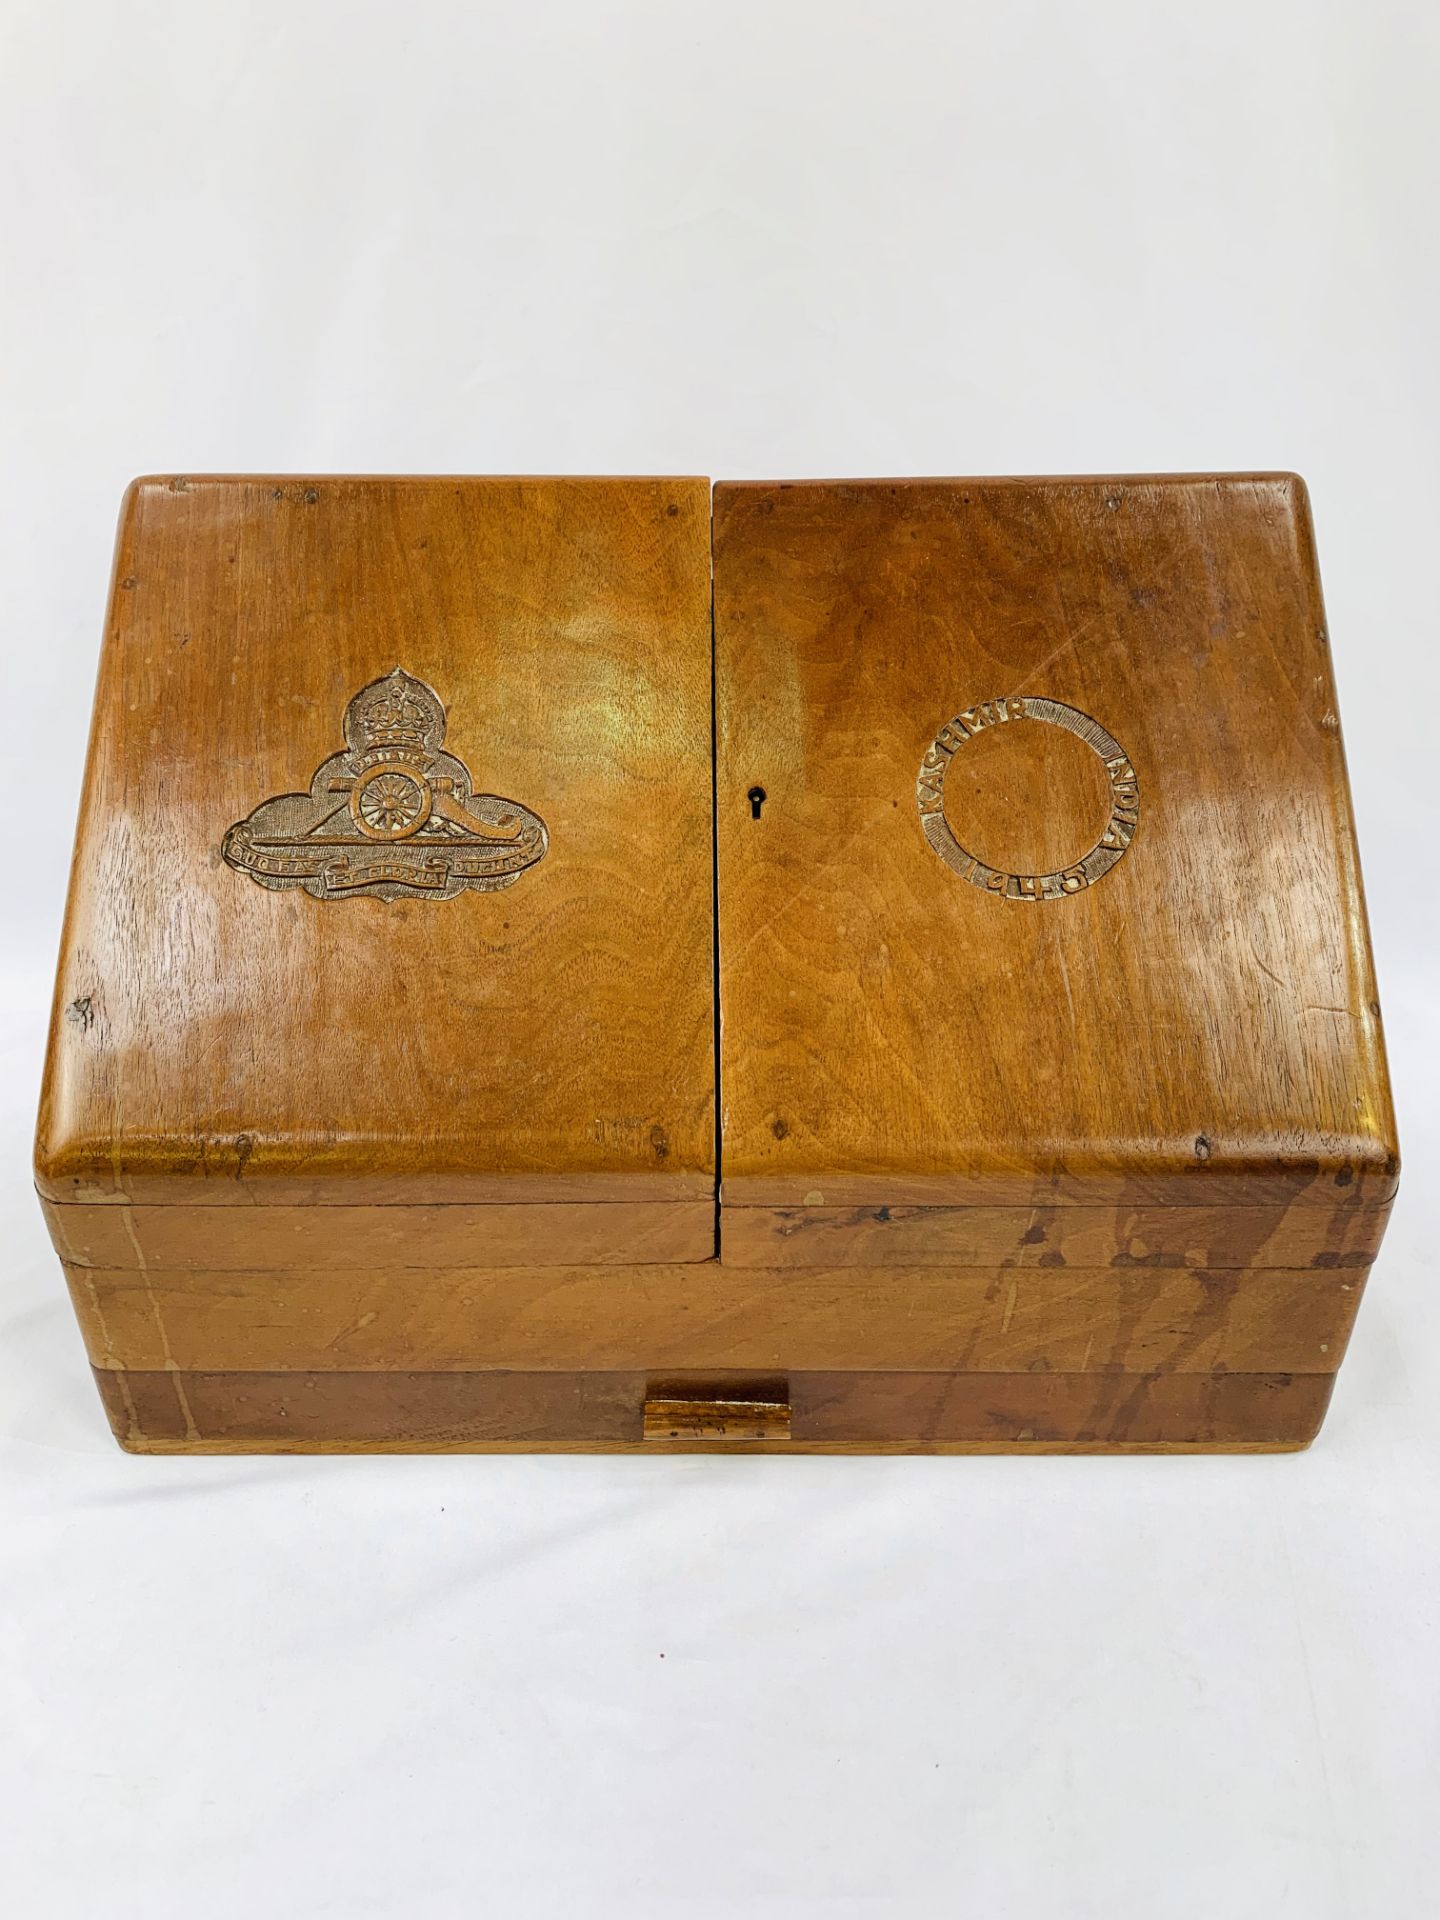 Mahogany stationery box carved with the crest of the Royal Artillery